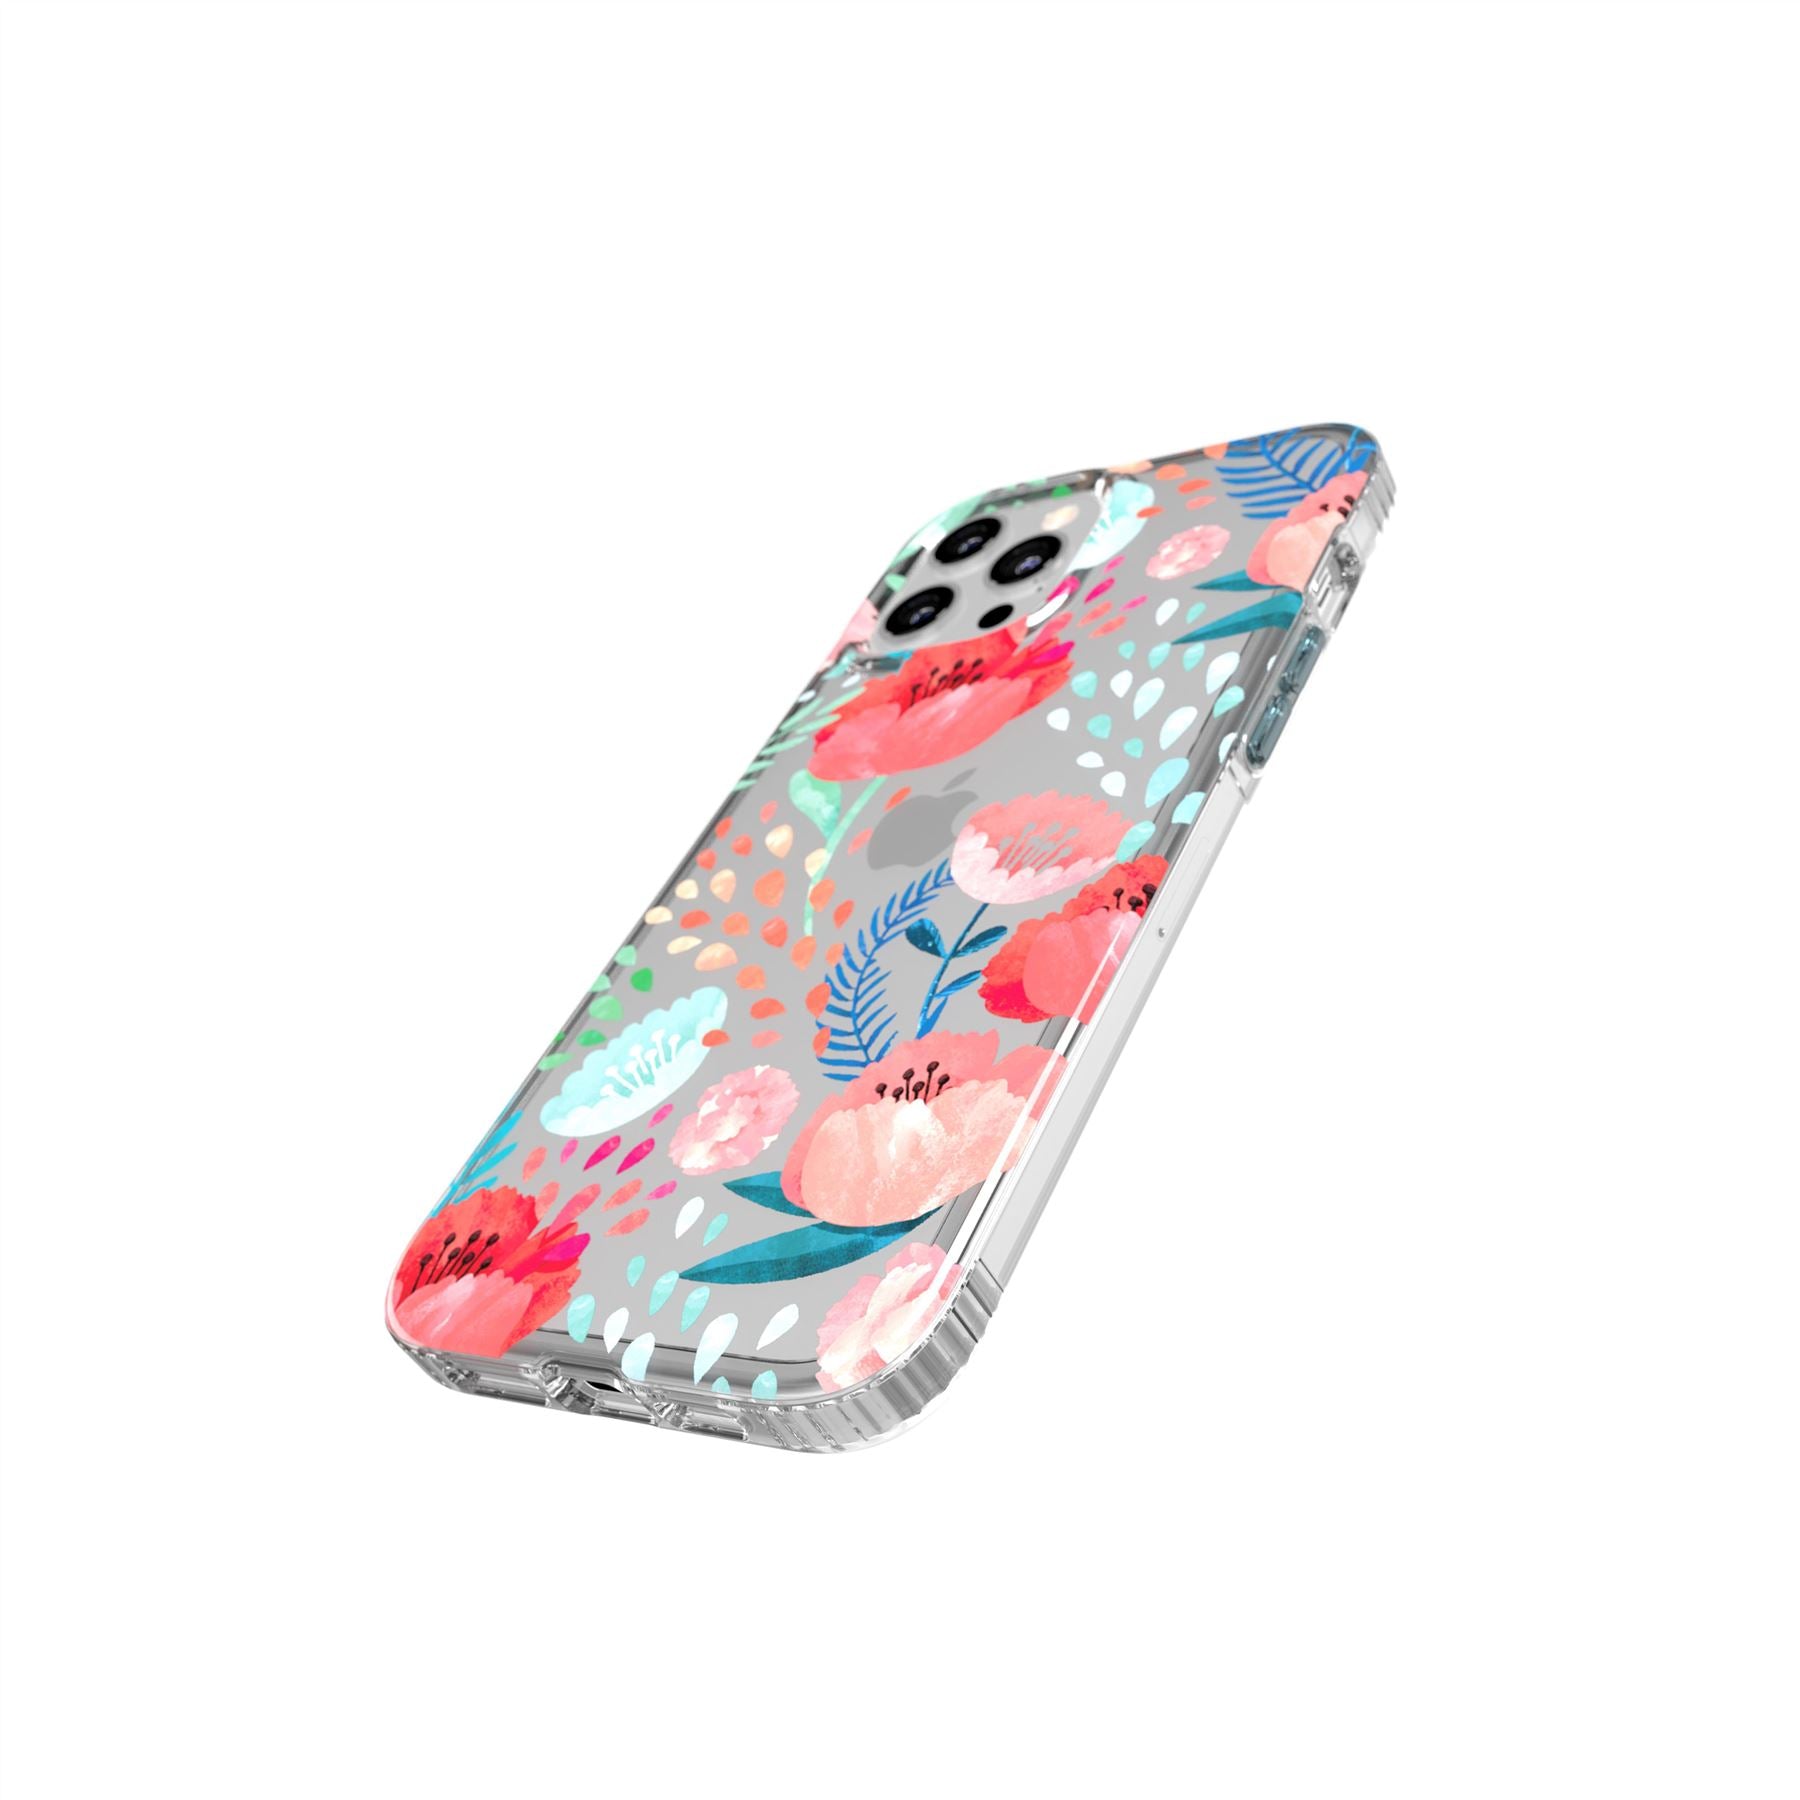 Evo Art - Apple iPhone 12 Pro Max Case - Coral Red